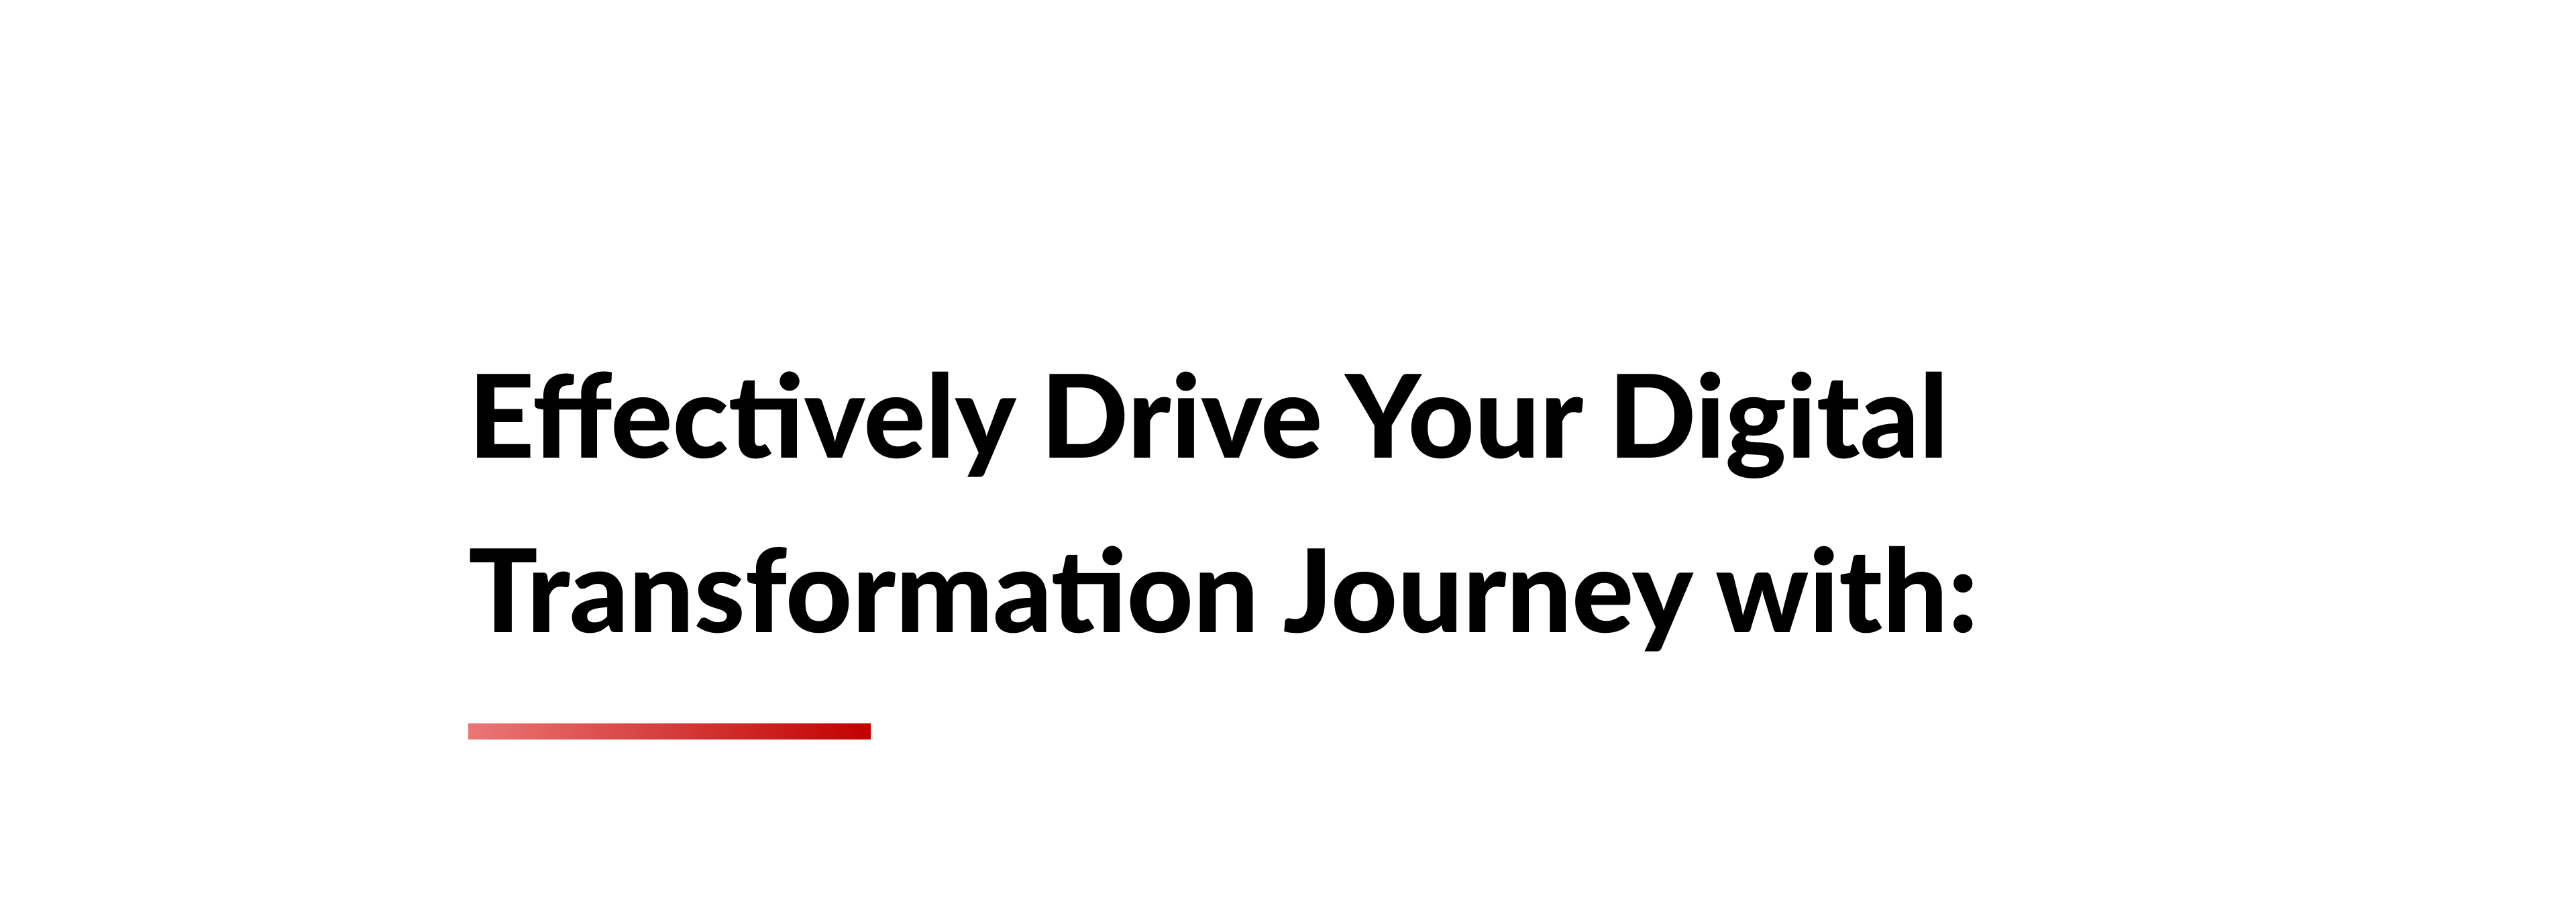 Our digital transformation consultancy can help you effectively drive your digital transformation journey